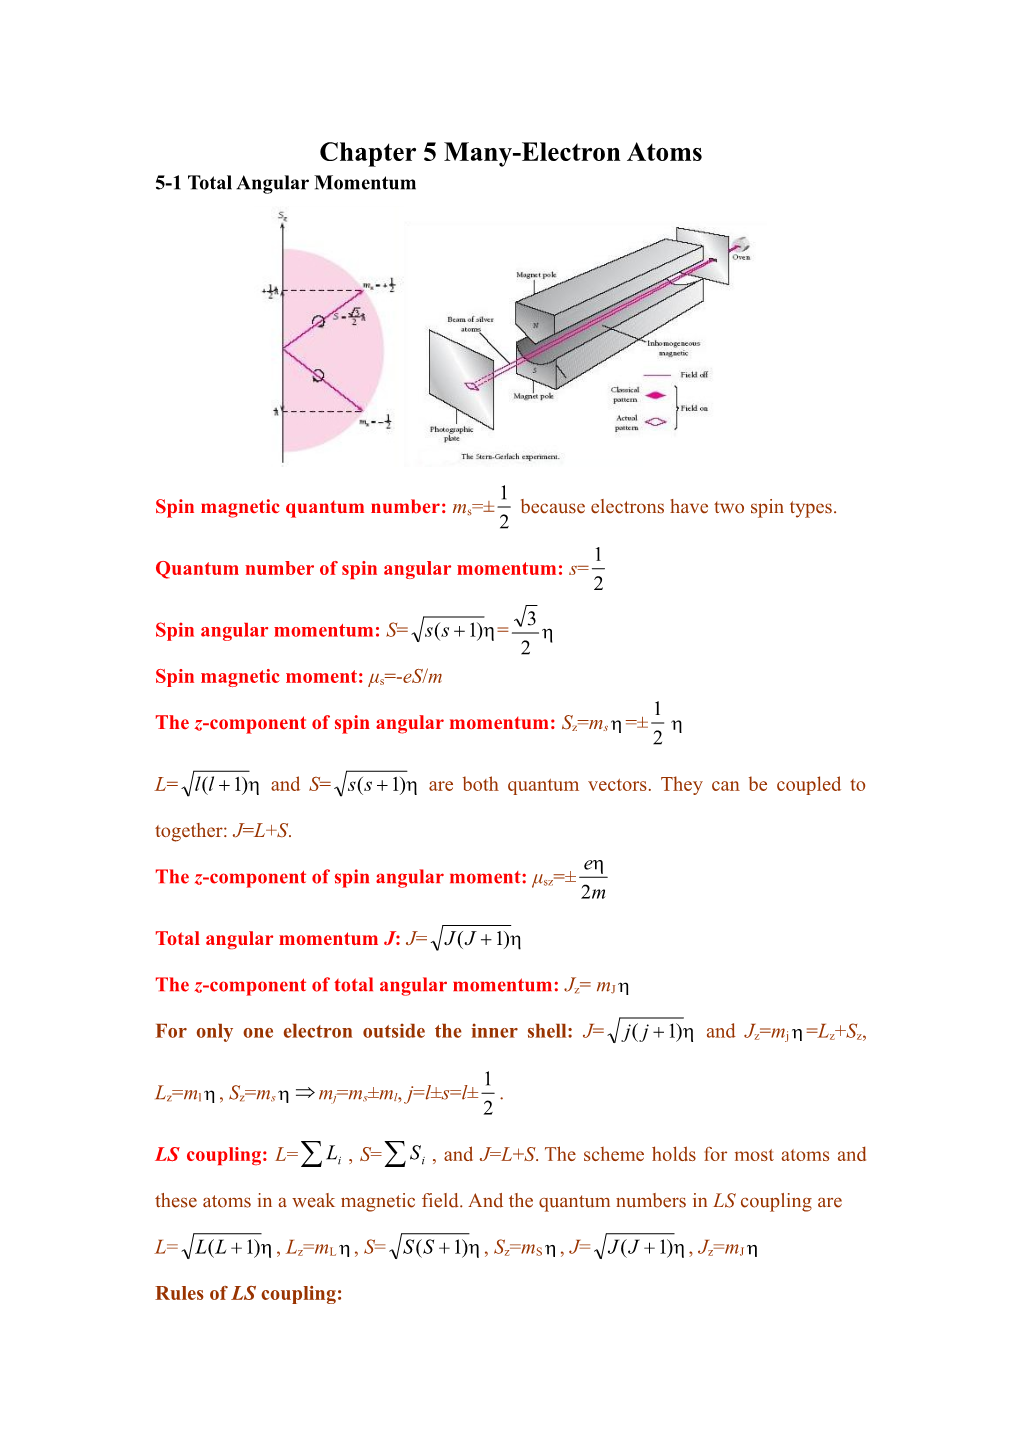 Chapter 5 Many-Electron Atoms